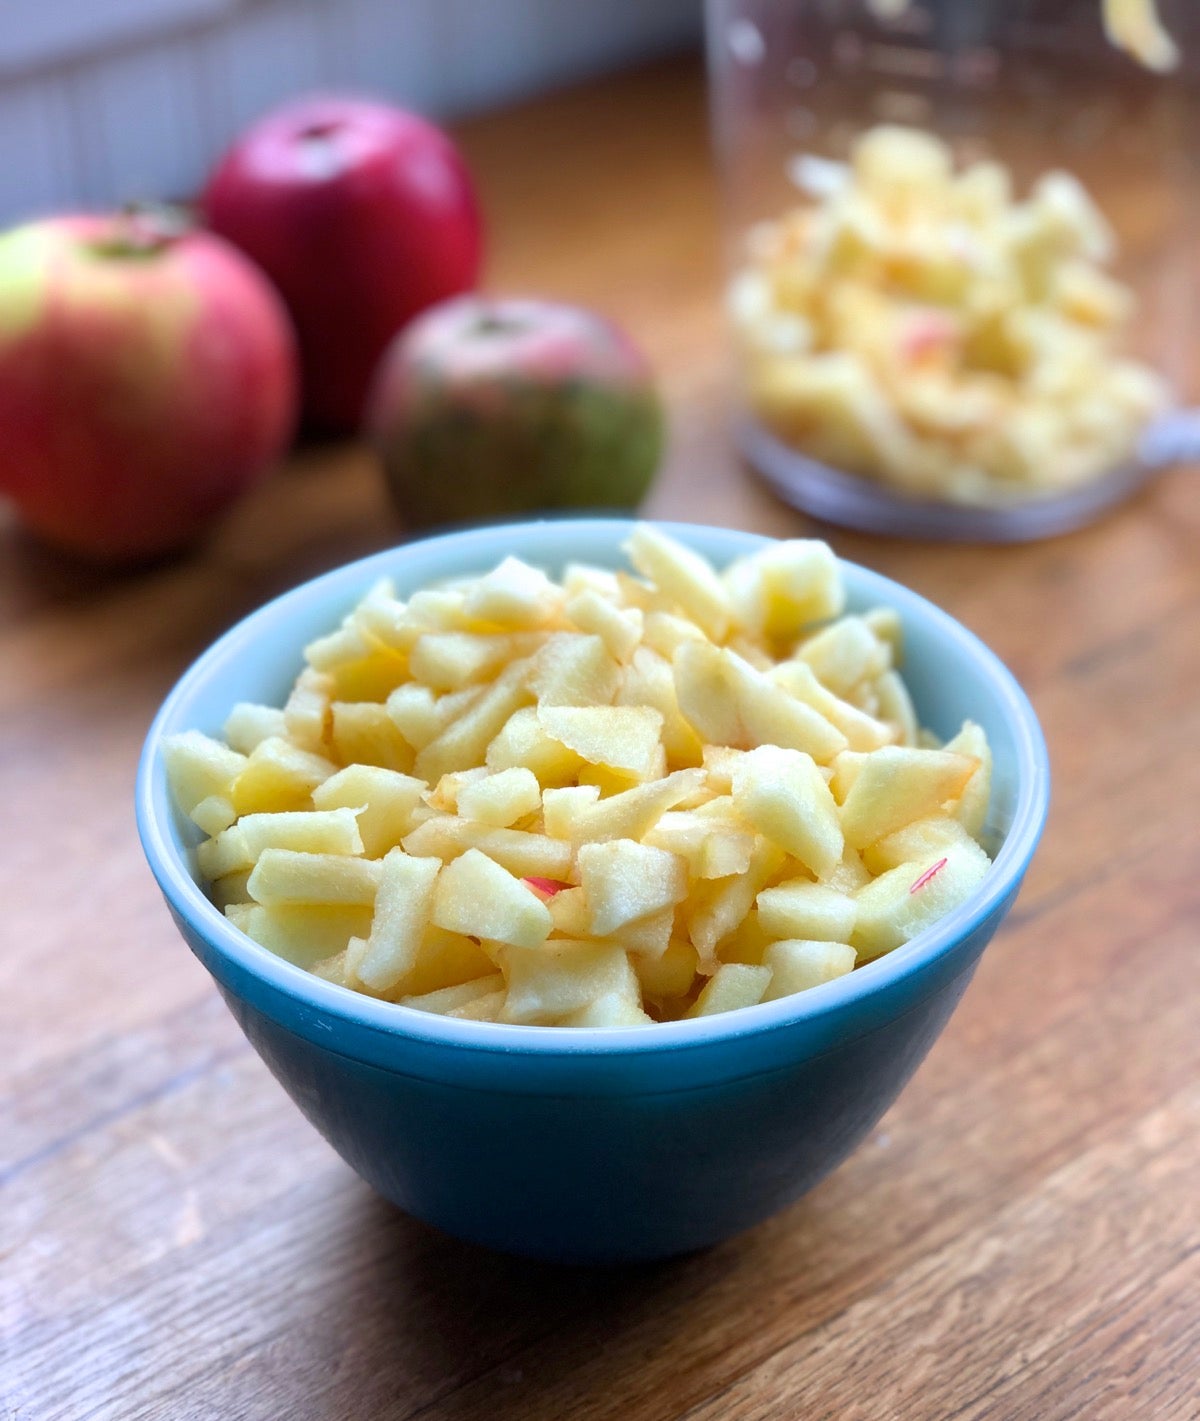 Bowl of diced apples ready to be made into apple pie filling.